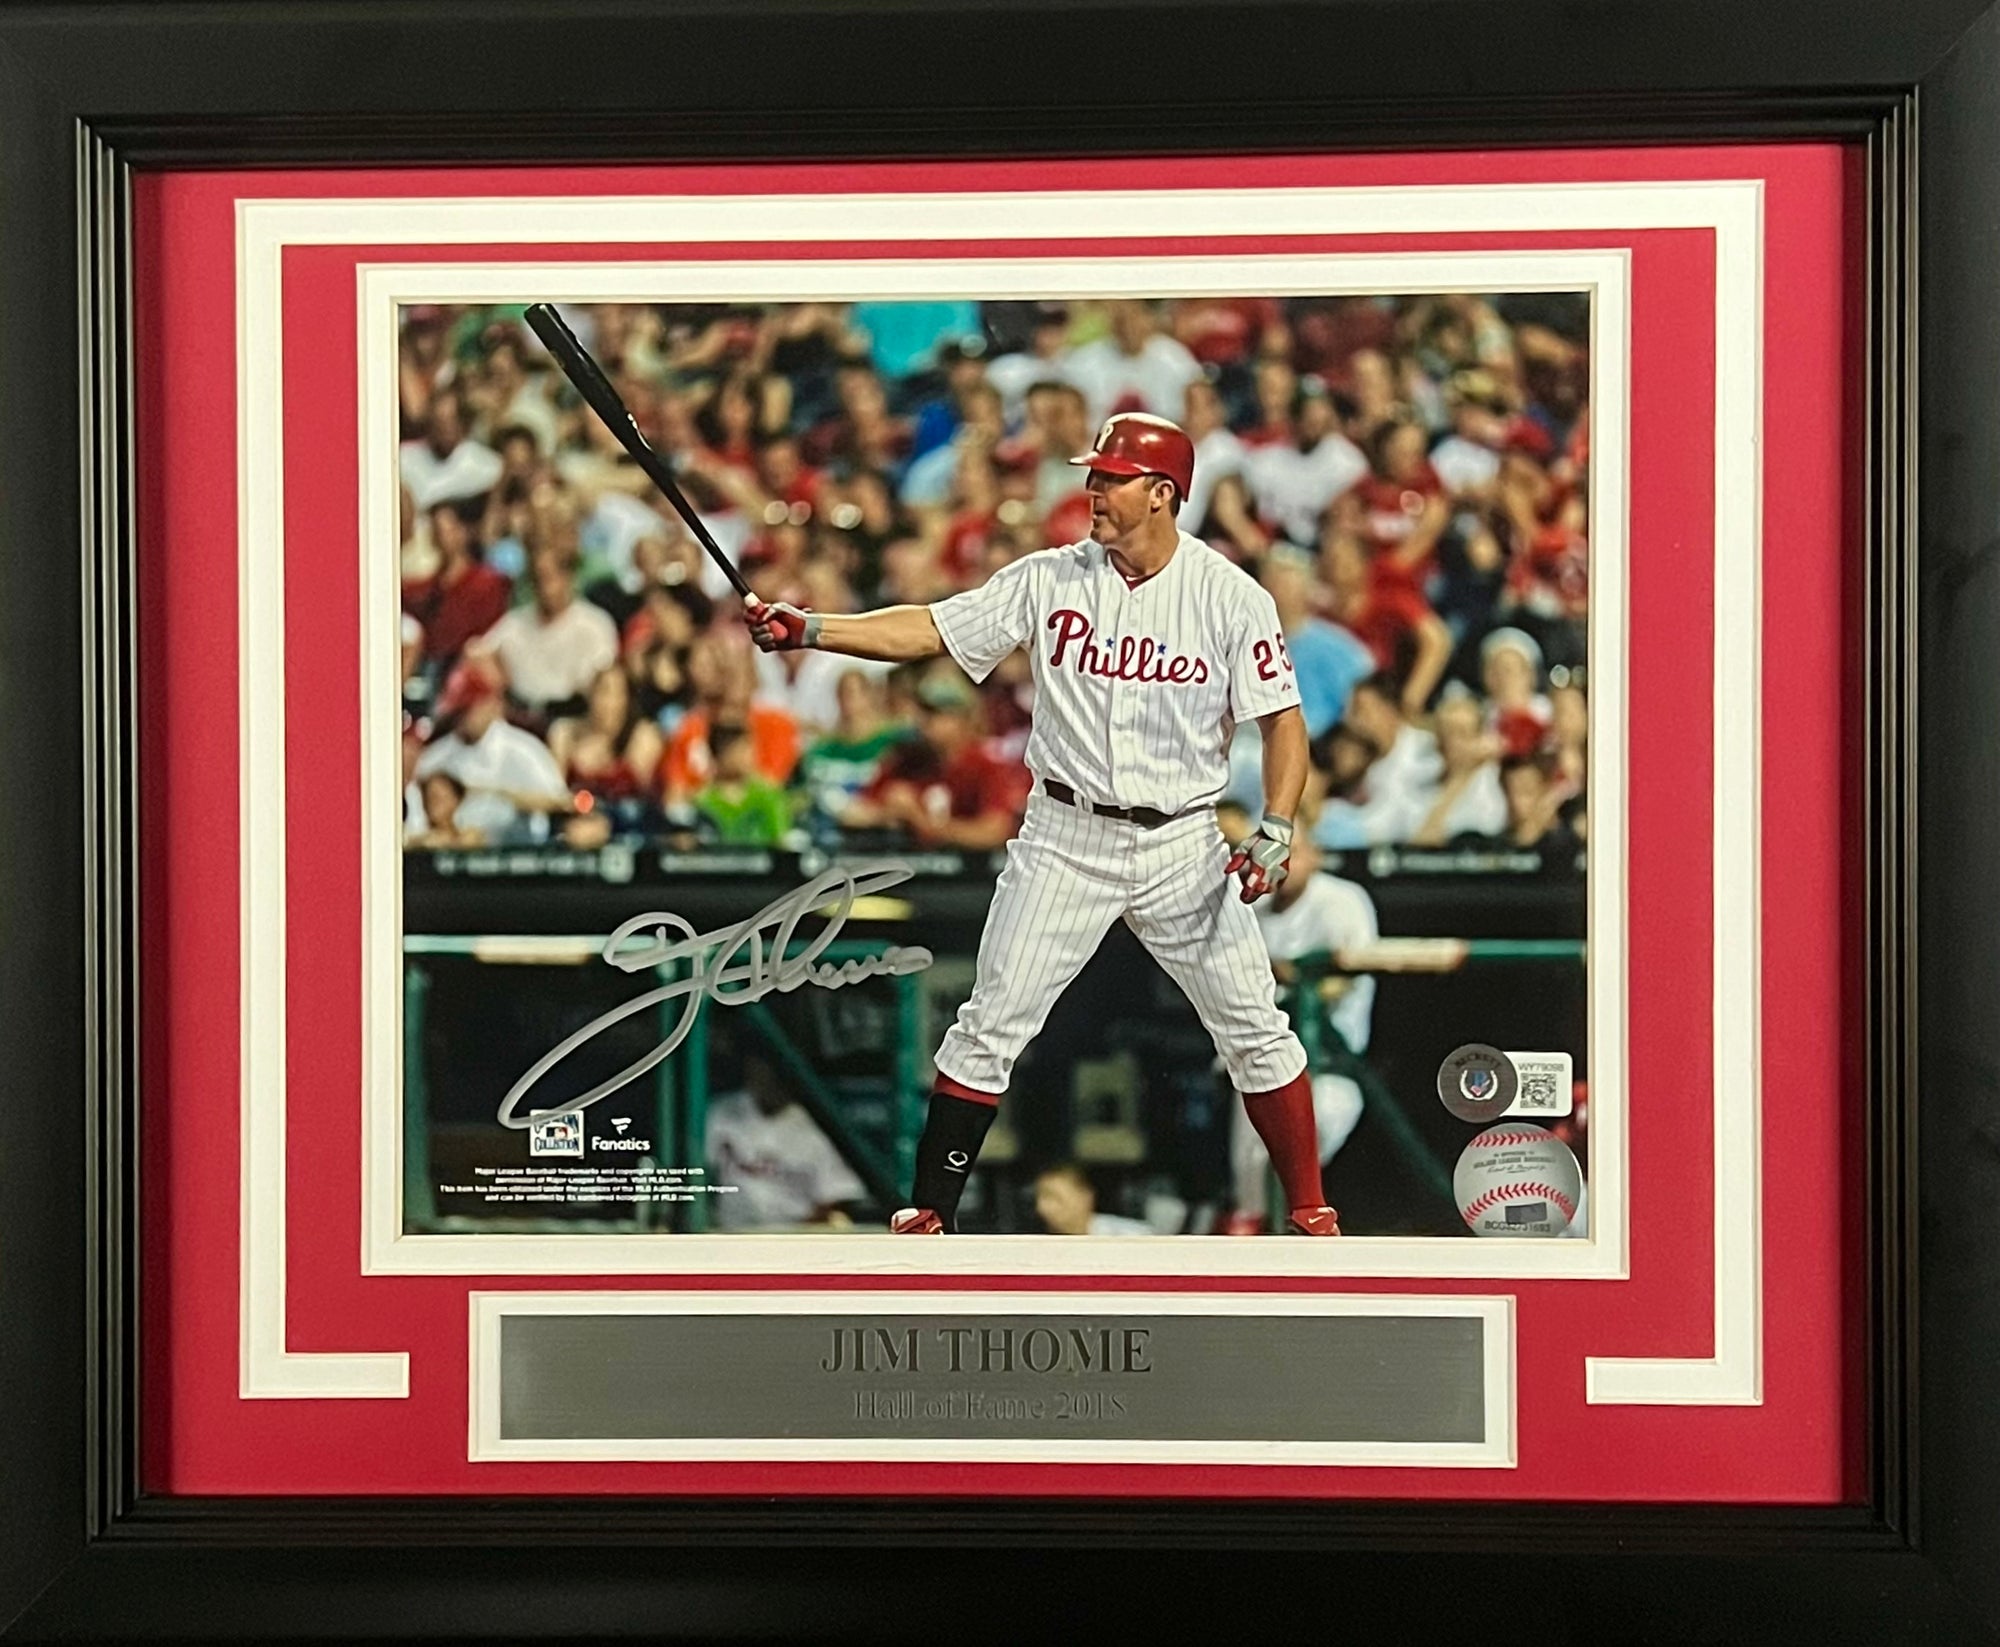 Cole Hamels Signed Framed 16x20 Phillies Photo 08 WS MVP Inscribed BAS Itp